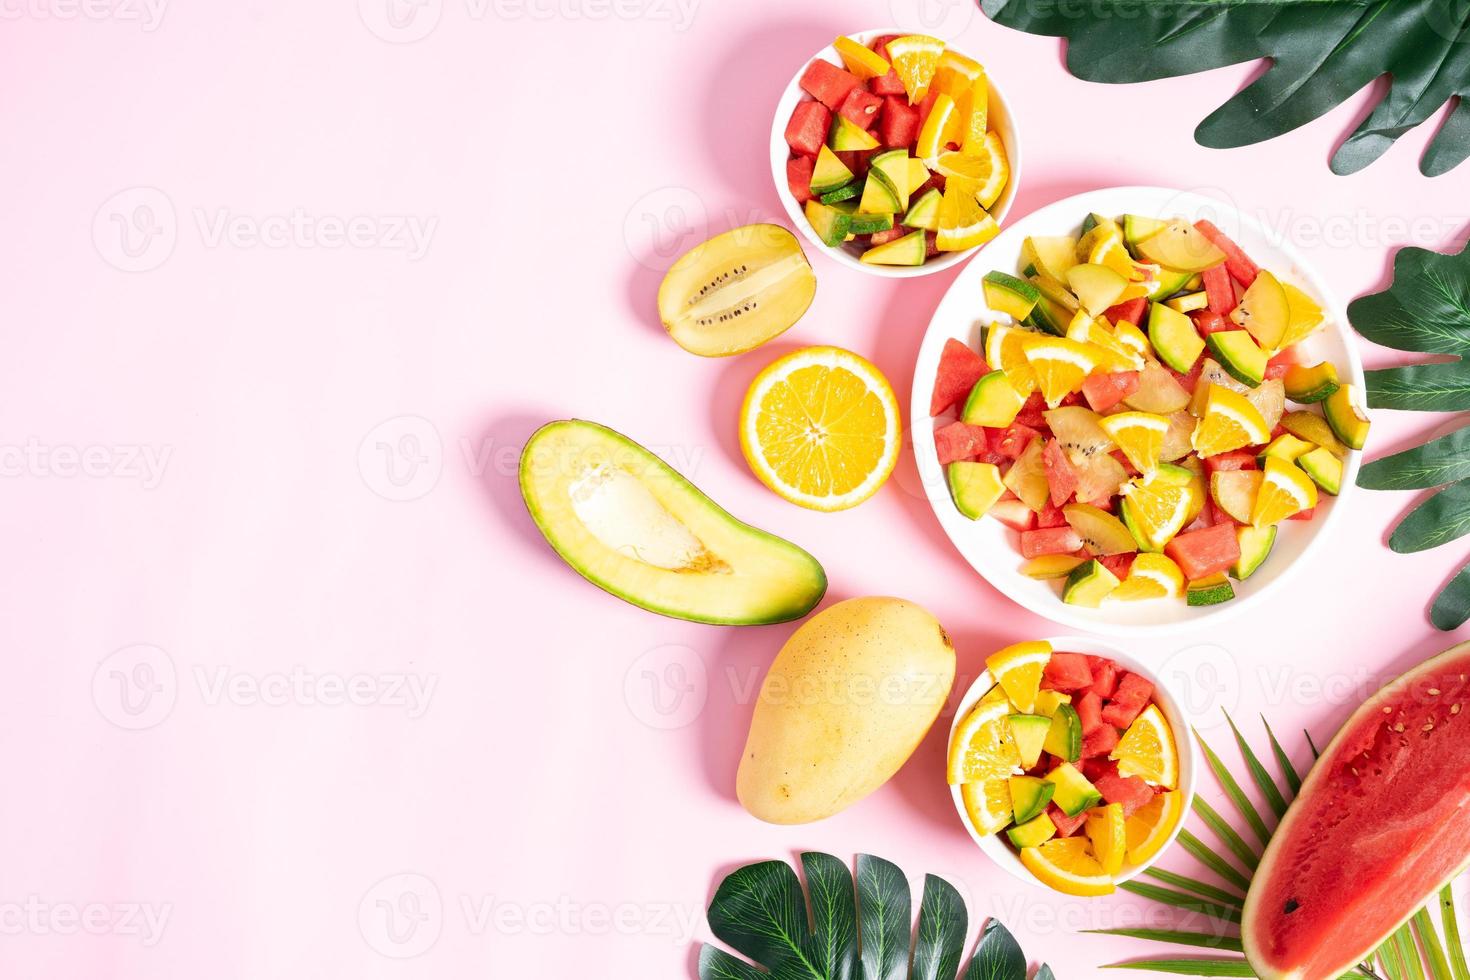 Chopped tropical fruit in bowls and plates photo